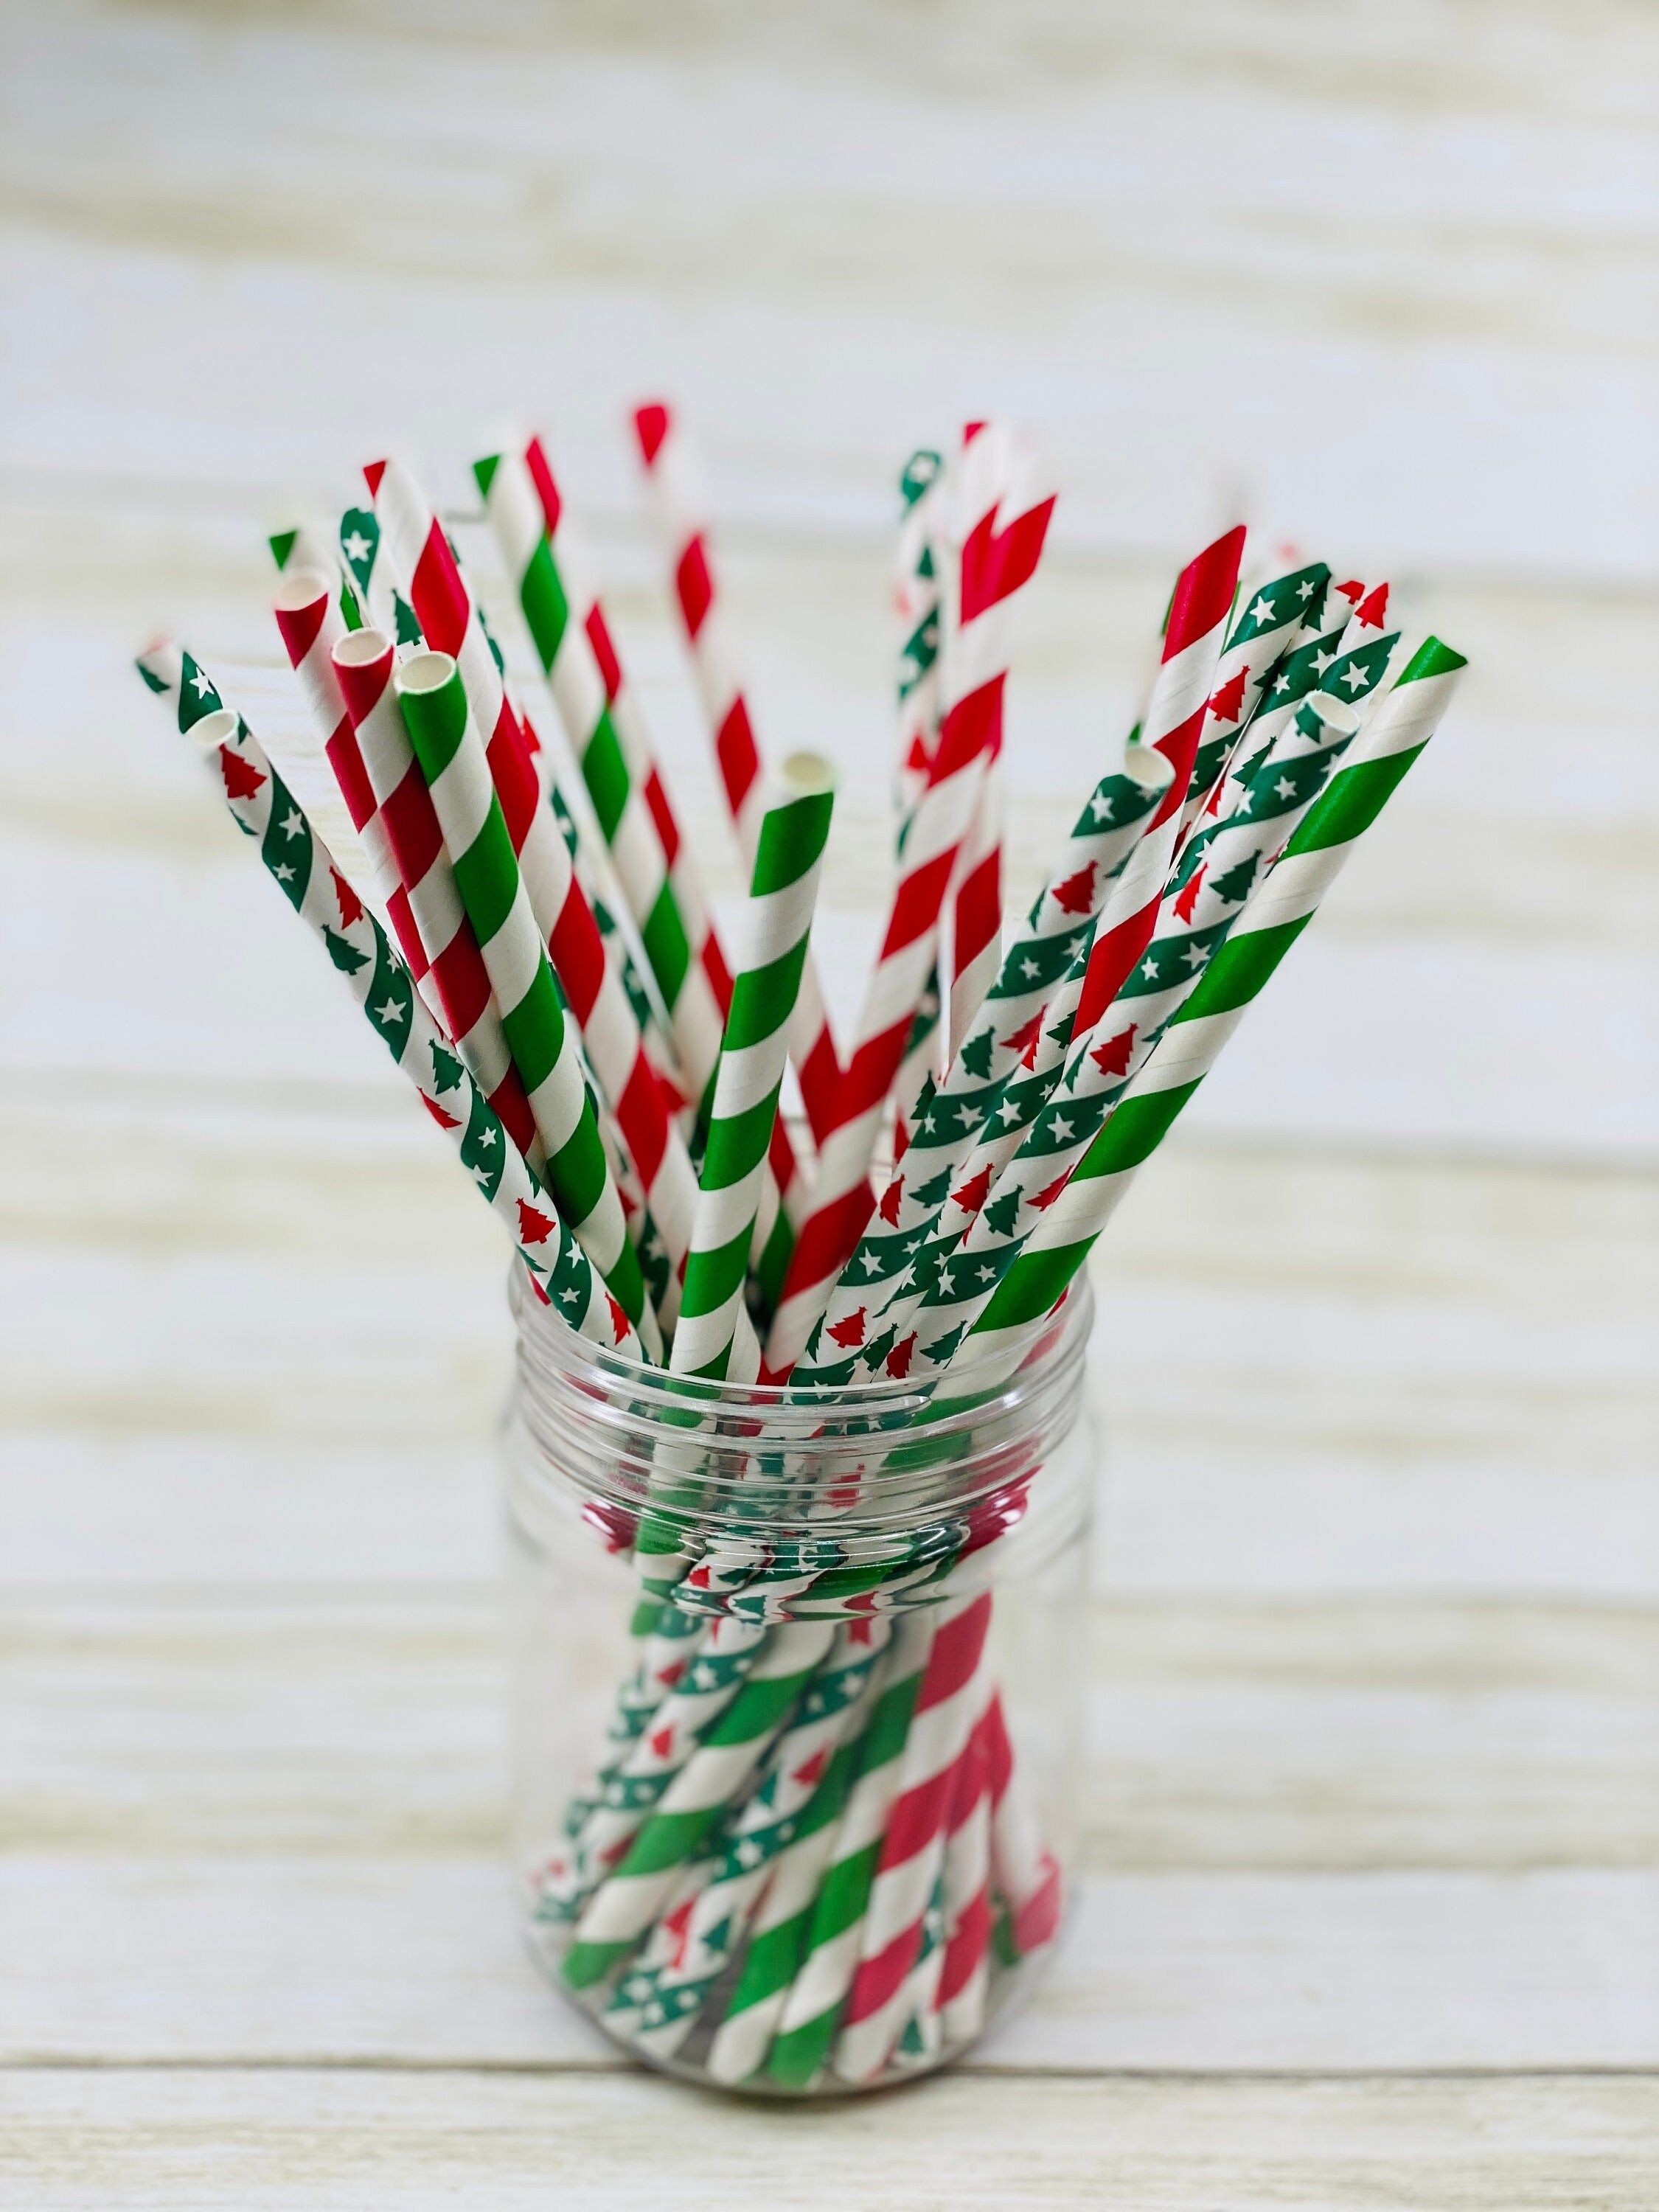 ALINK 200 Christmas Paper Straws, 8 Styles Red Green White Gold  Biodegradable Party Drinking Straws with Stripe, Wave, Christmas Tree  Snowflake Design